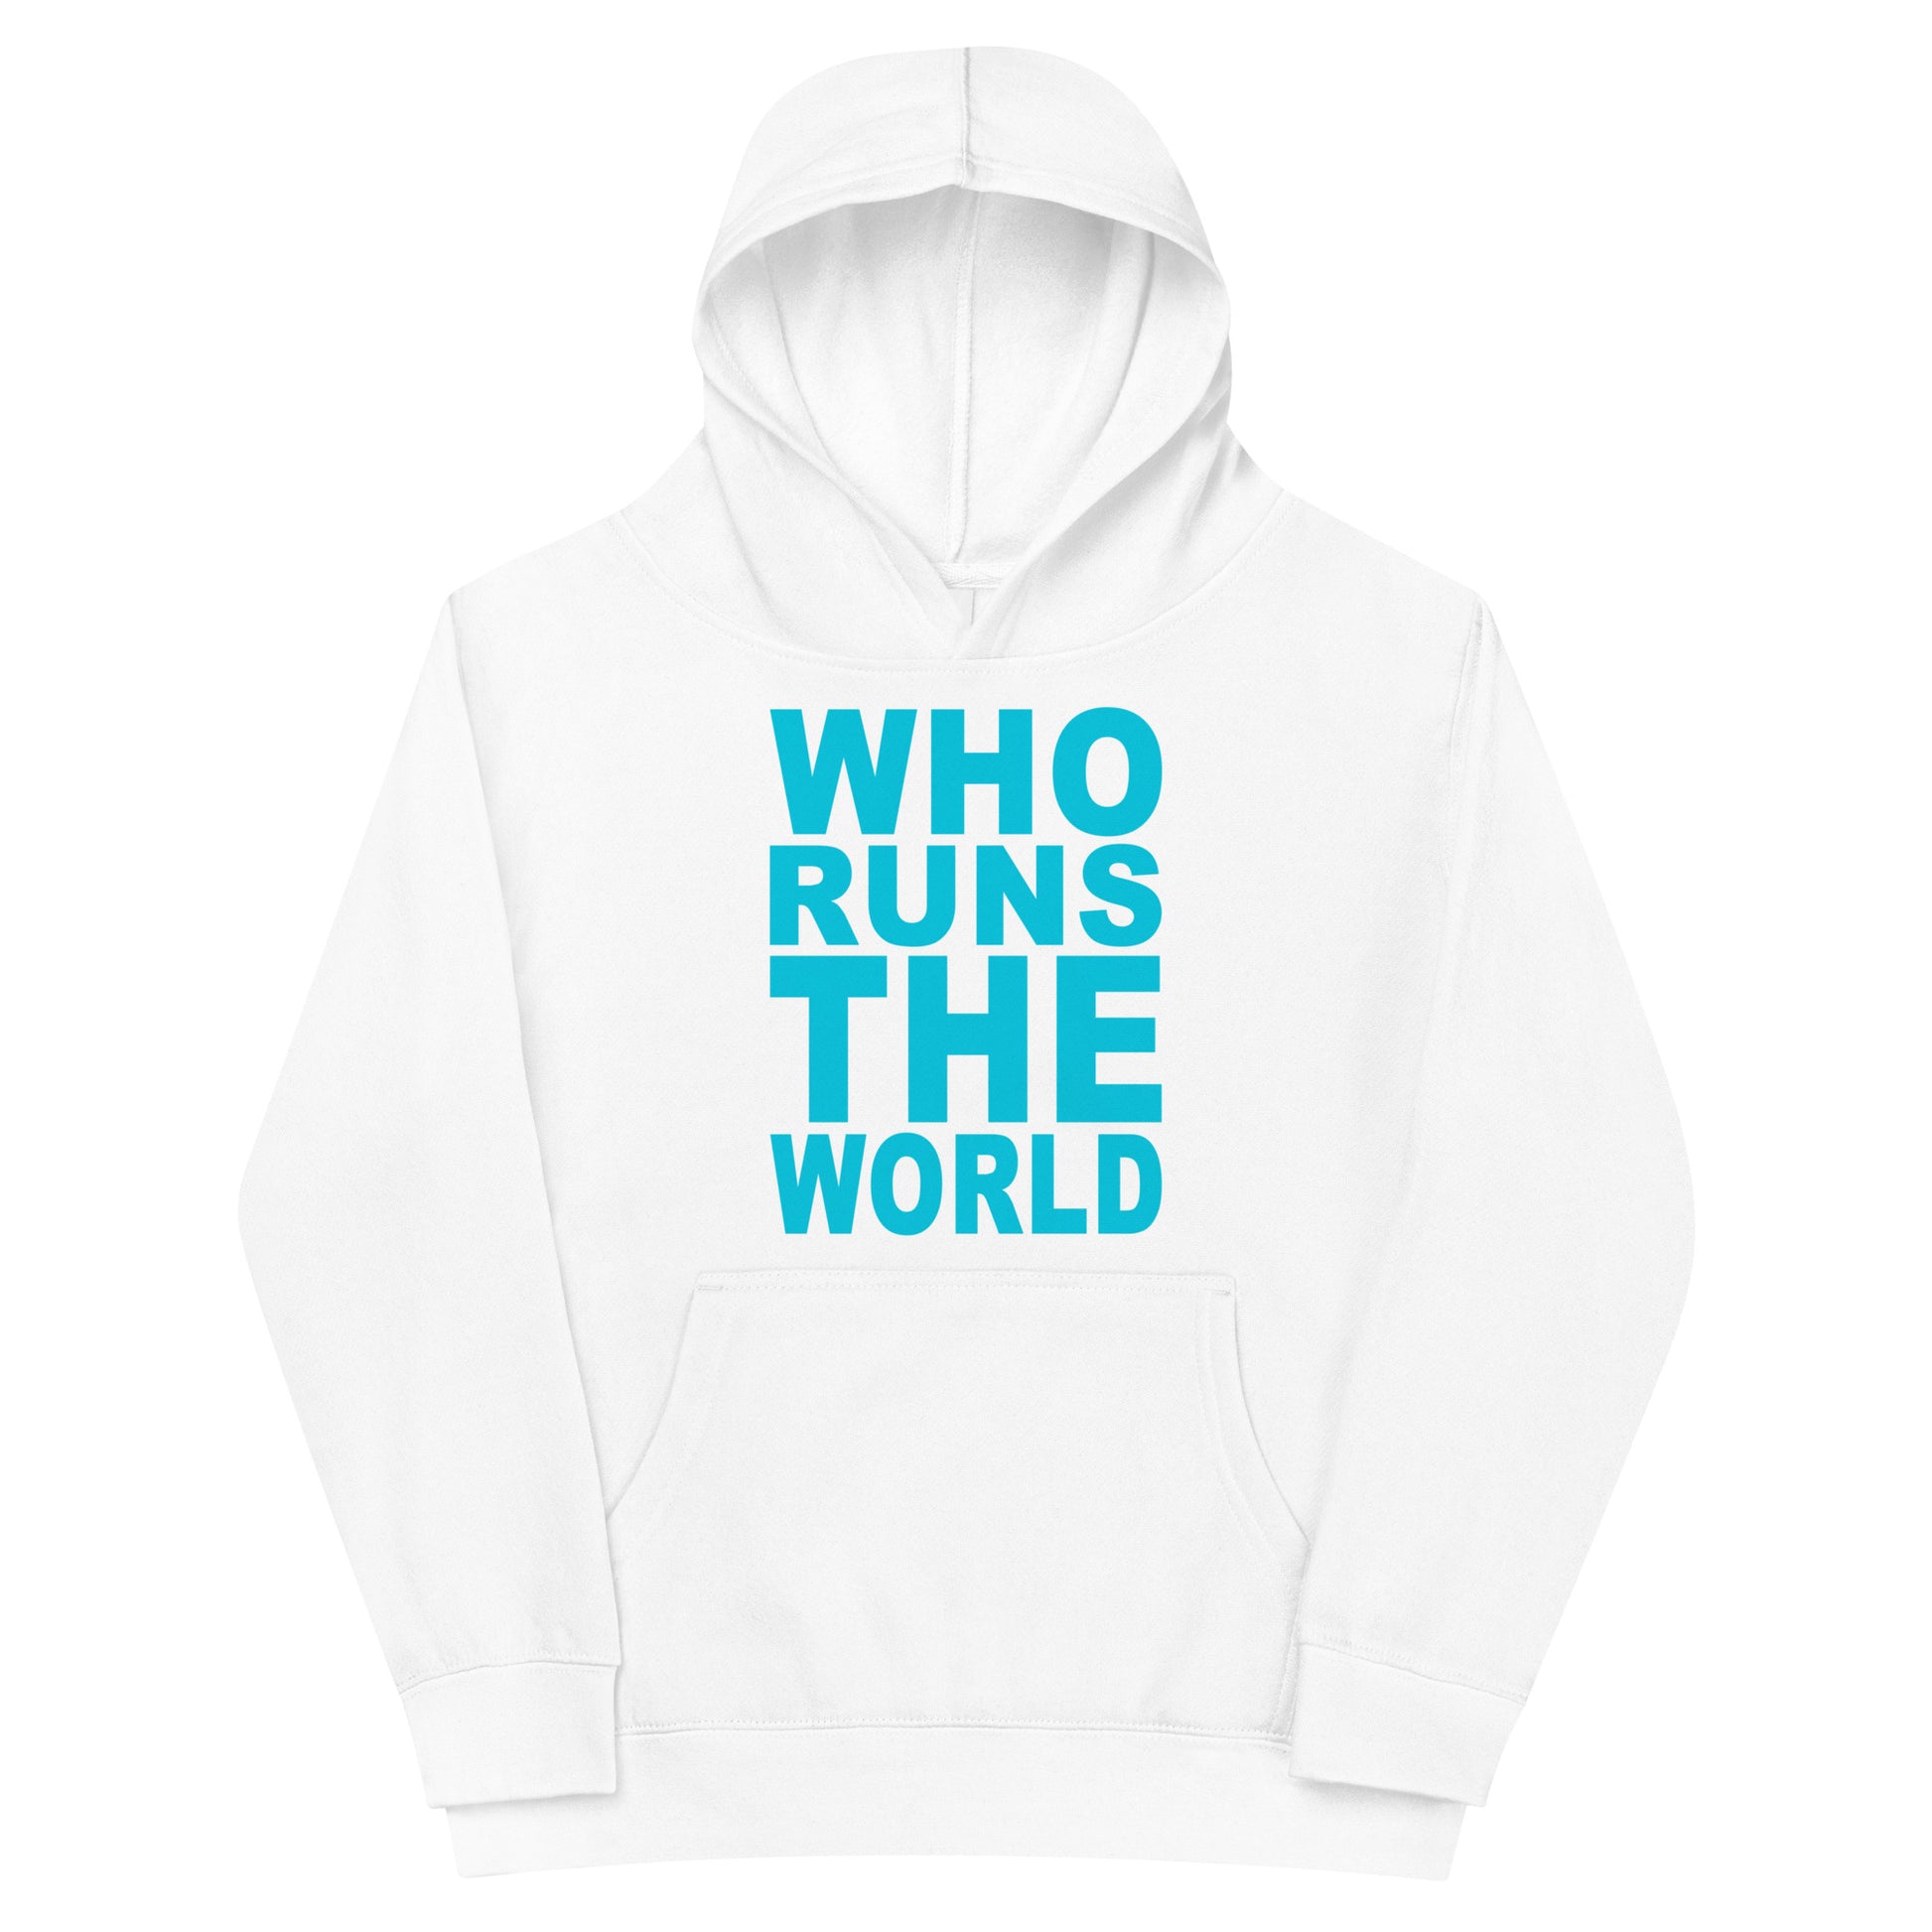 Fashion-forward hoodie for girls with who runs the world print-girlstronginc.com